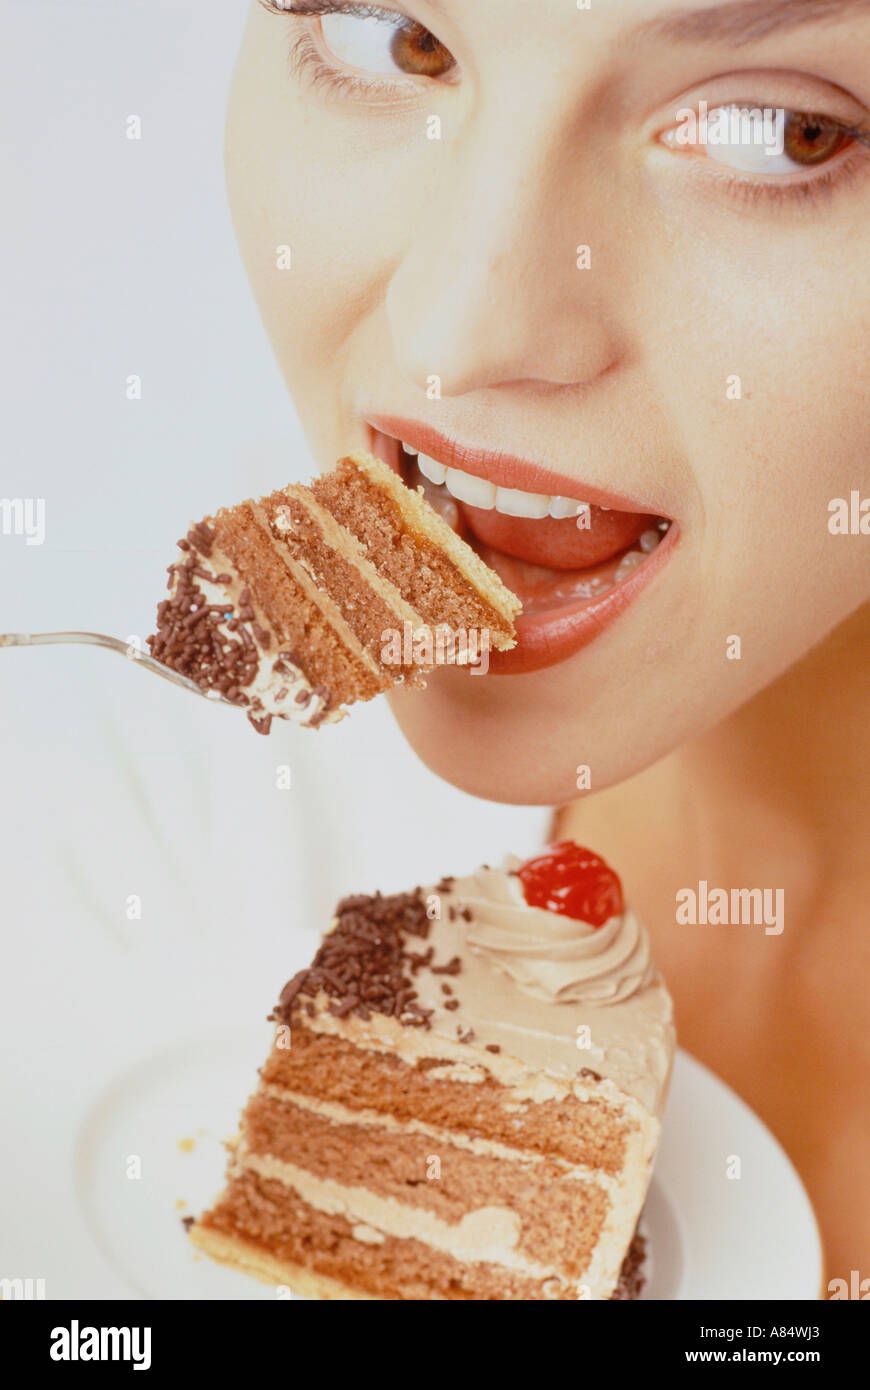 Close-up of young woman eating cake. Stock Photo